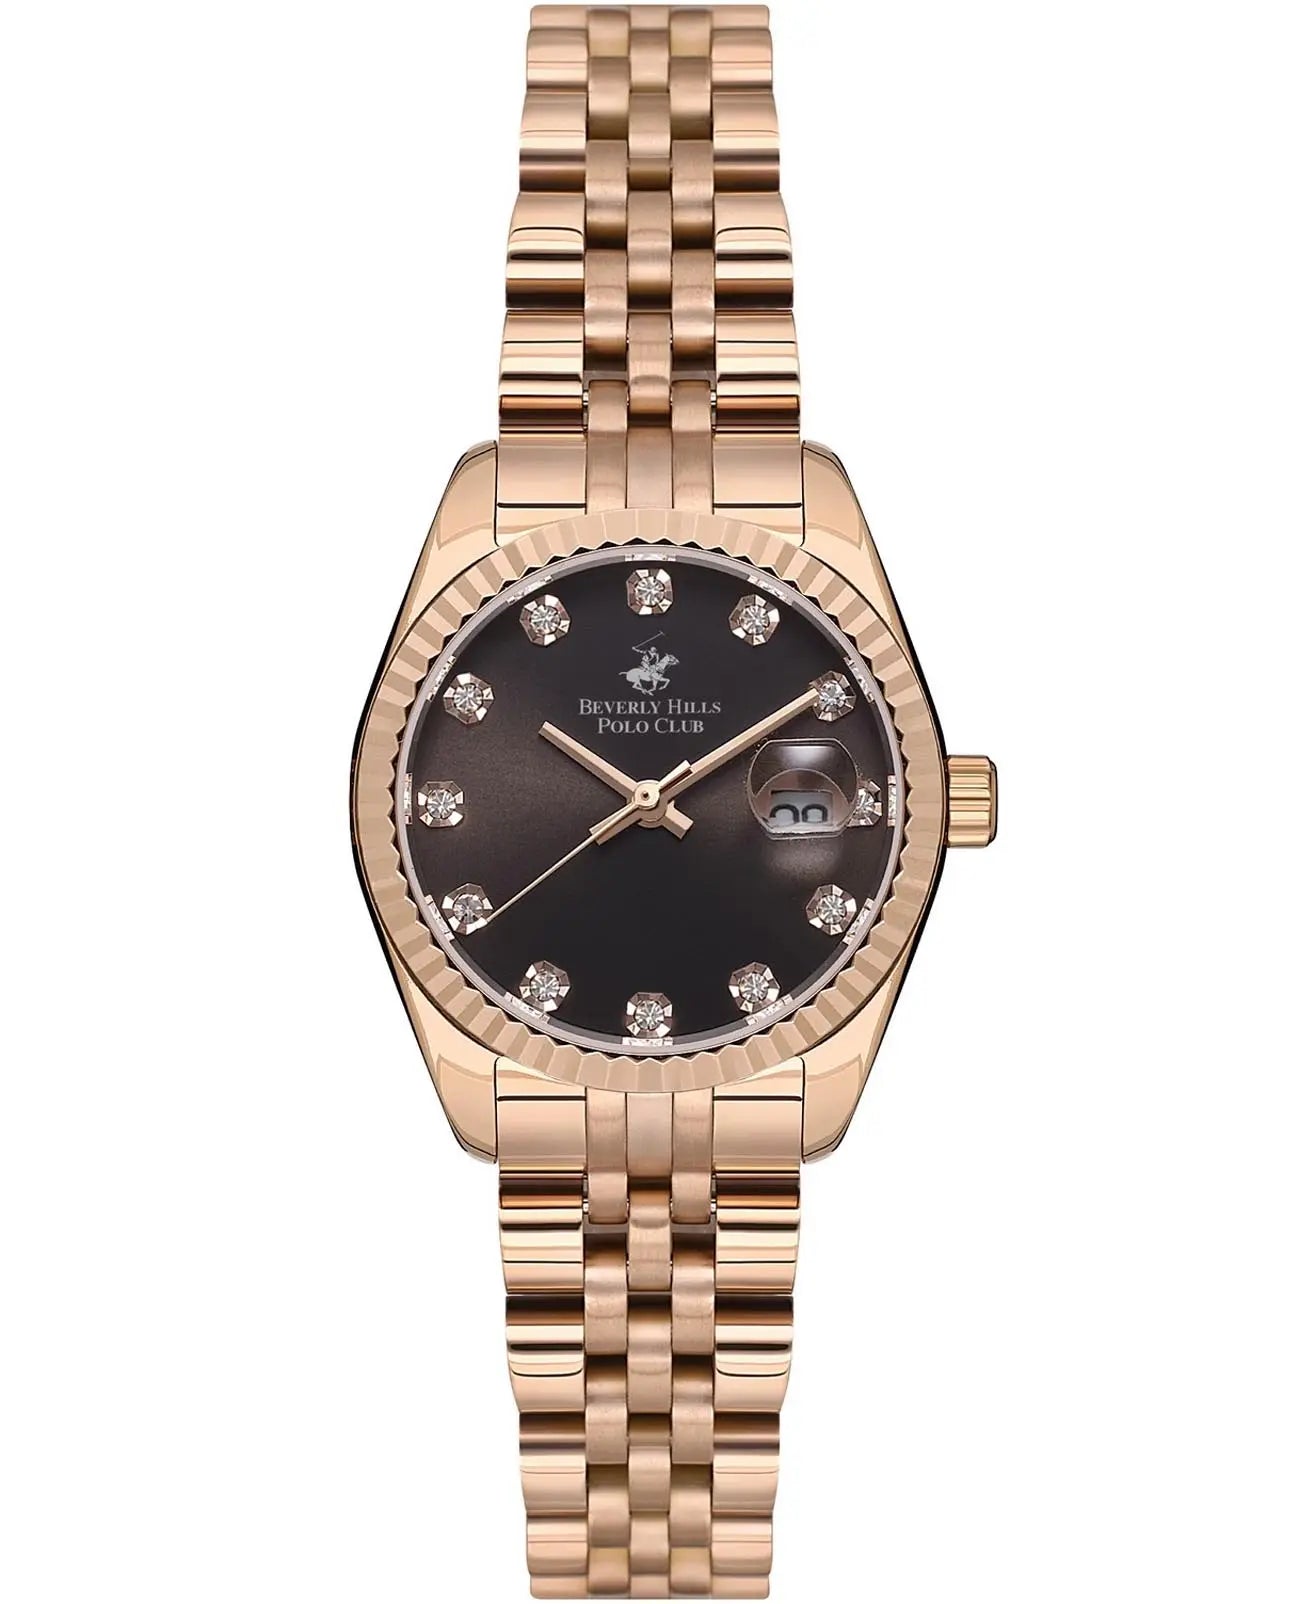 Beverly Hills Polo Club Women's Watch, Analog, Brown Dial, Rose Gold Stainless Steel Strap, BP3595X.450